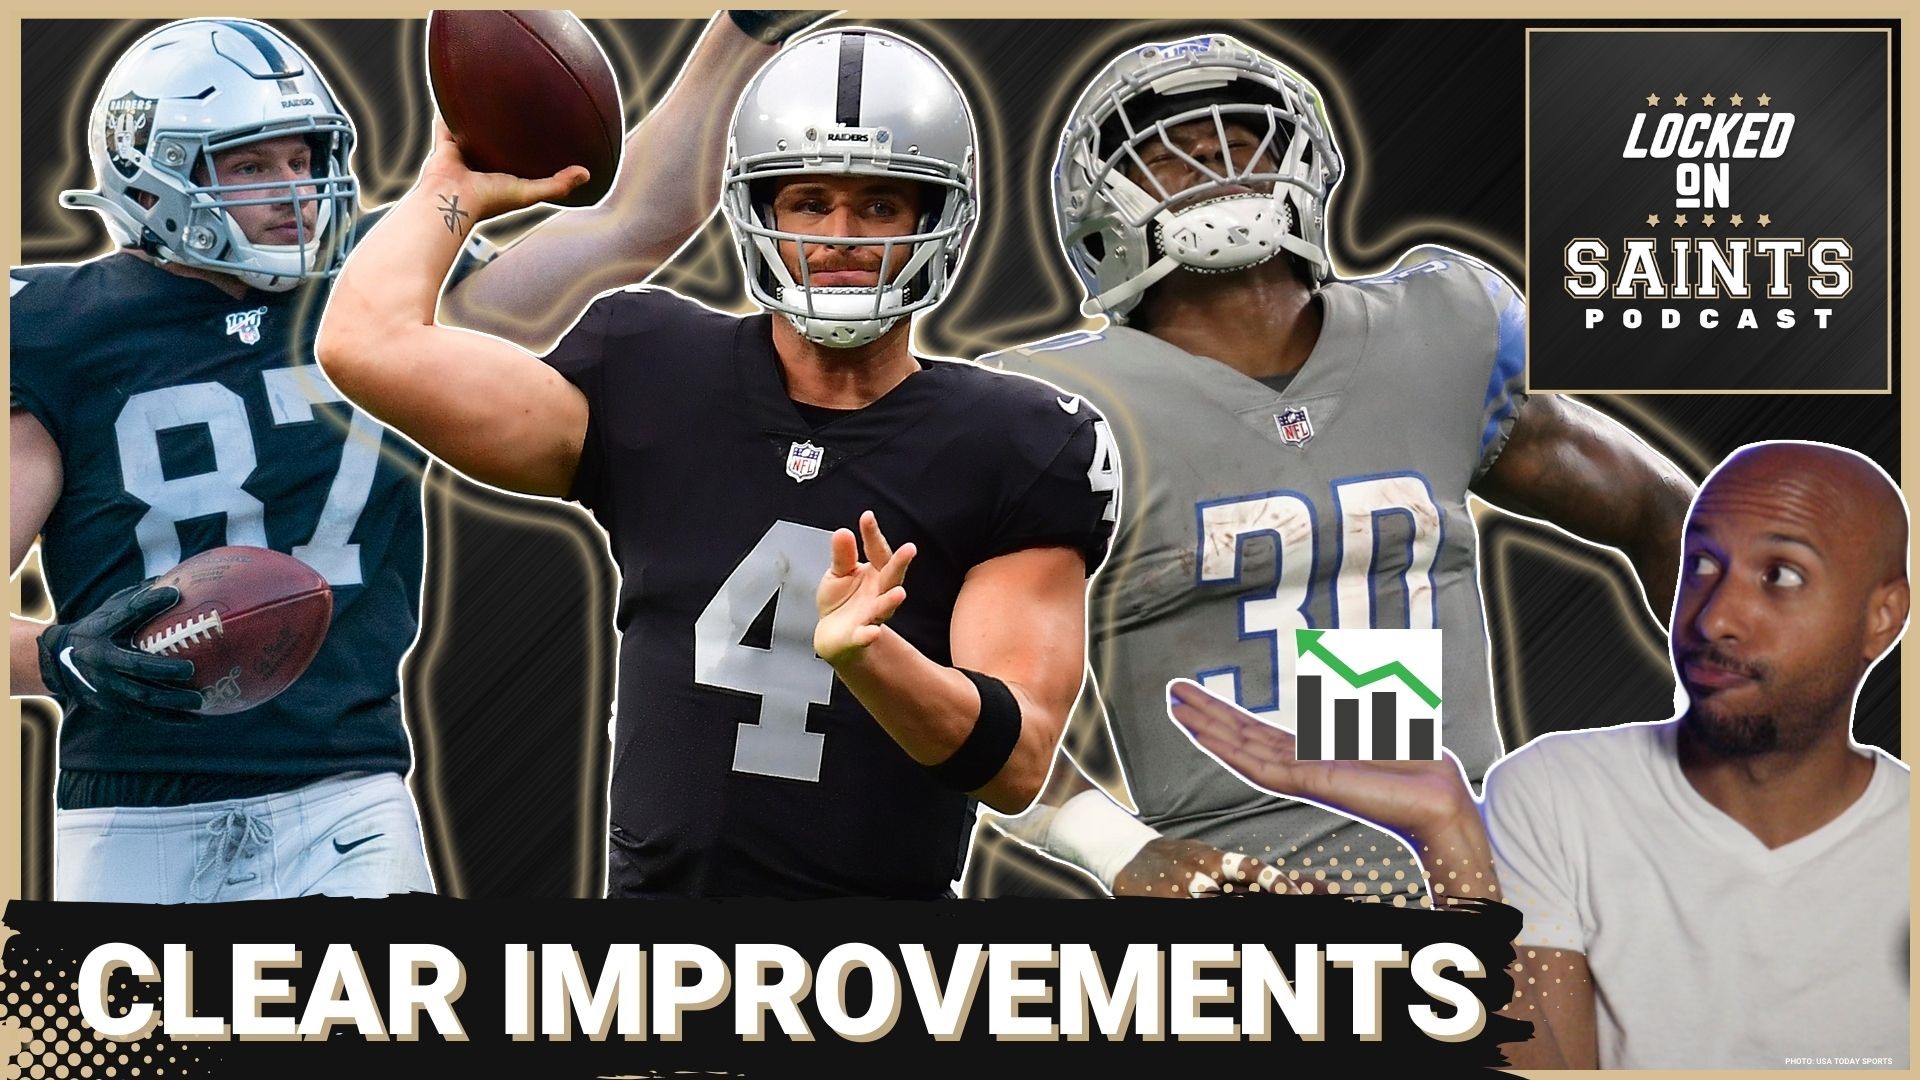 The New Orleans Saints took the field for the first day of OTAs and Derek Carr, Foster Moreau and Jamaal Williams provided clear impact right away as new additions.